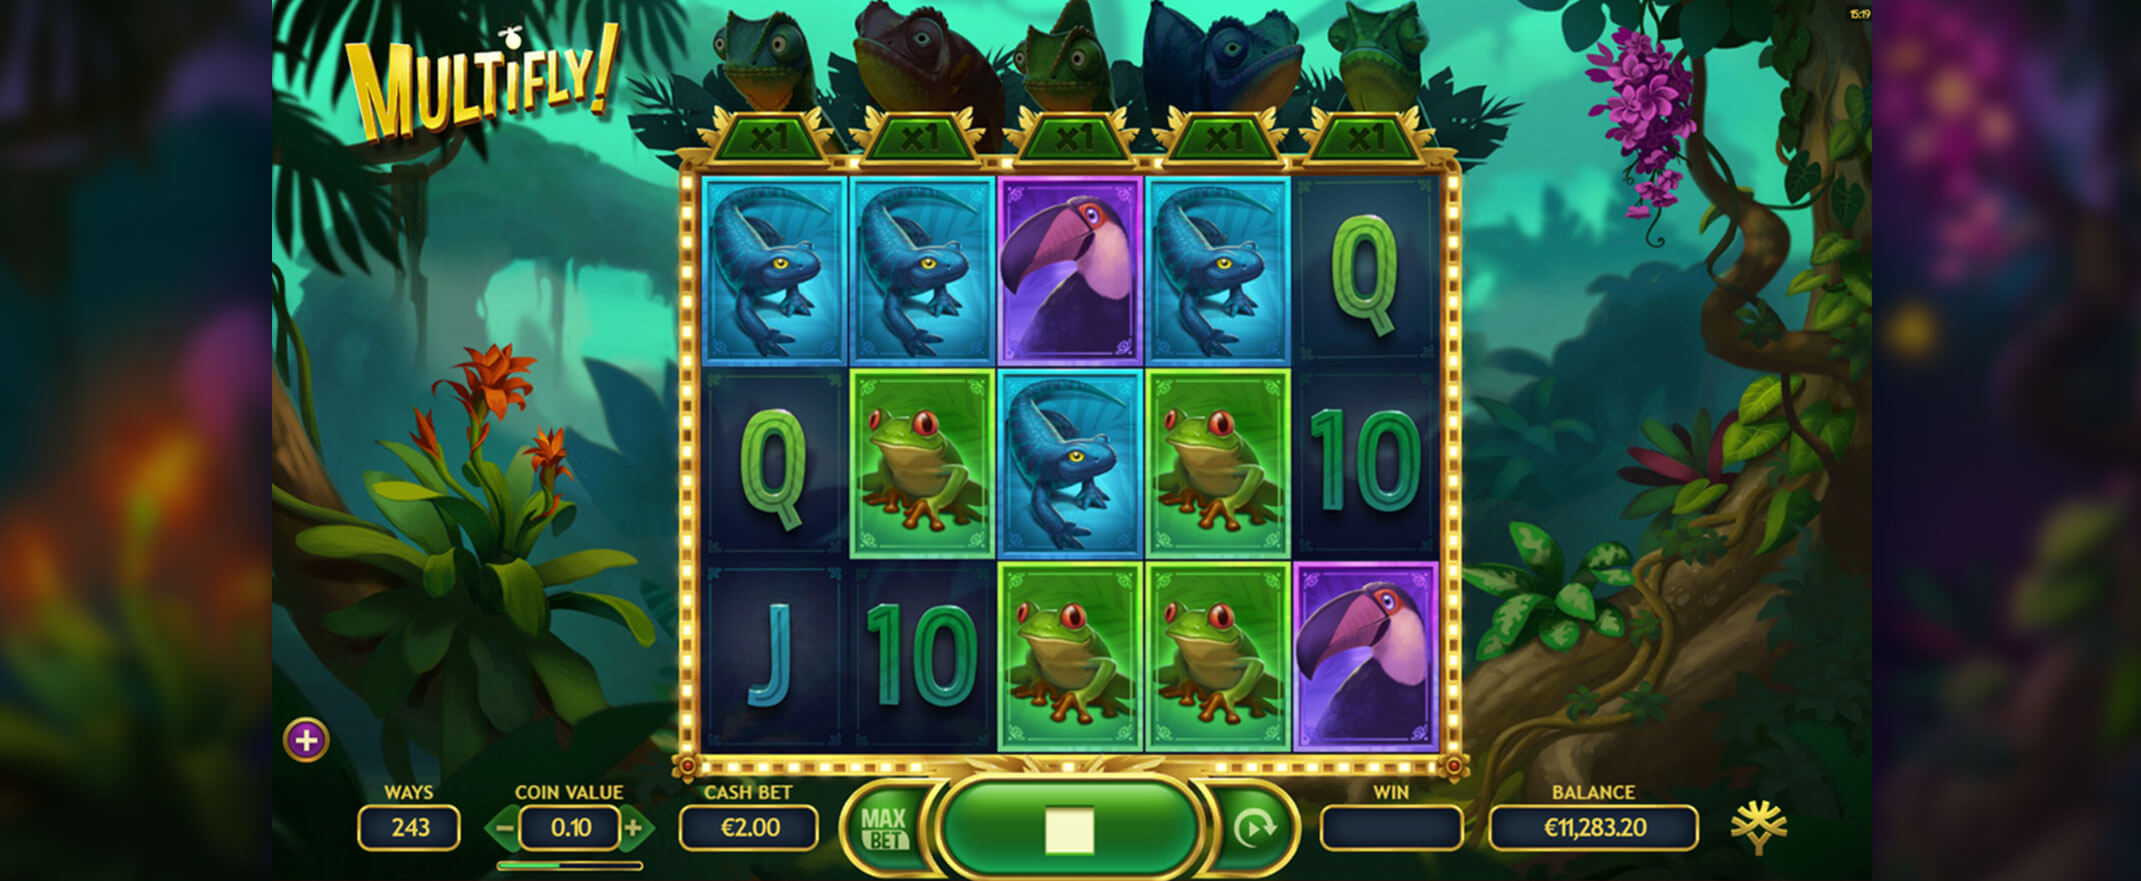 Multifly! Slot Review, image of the reels and symbols